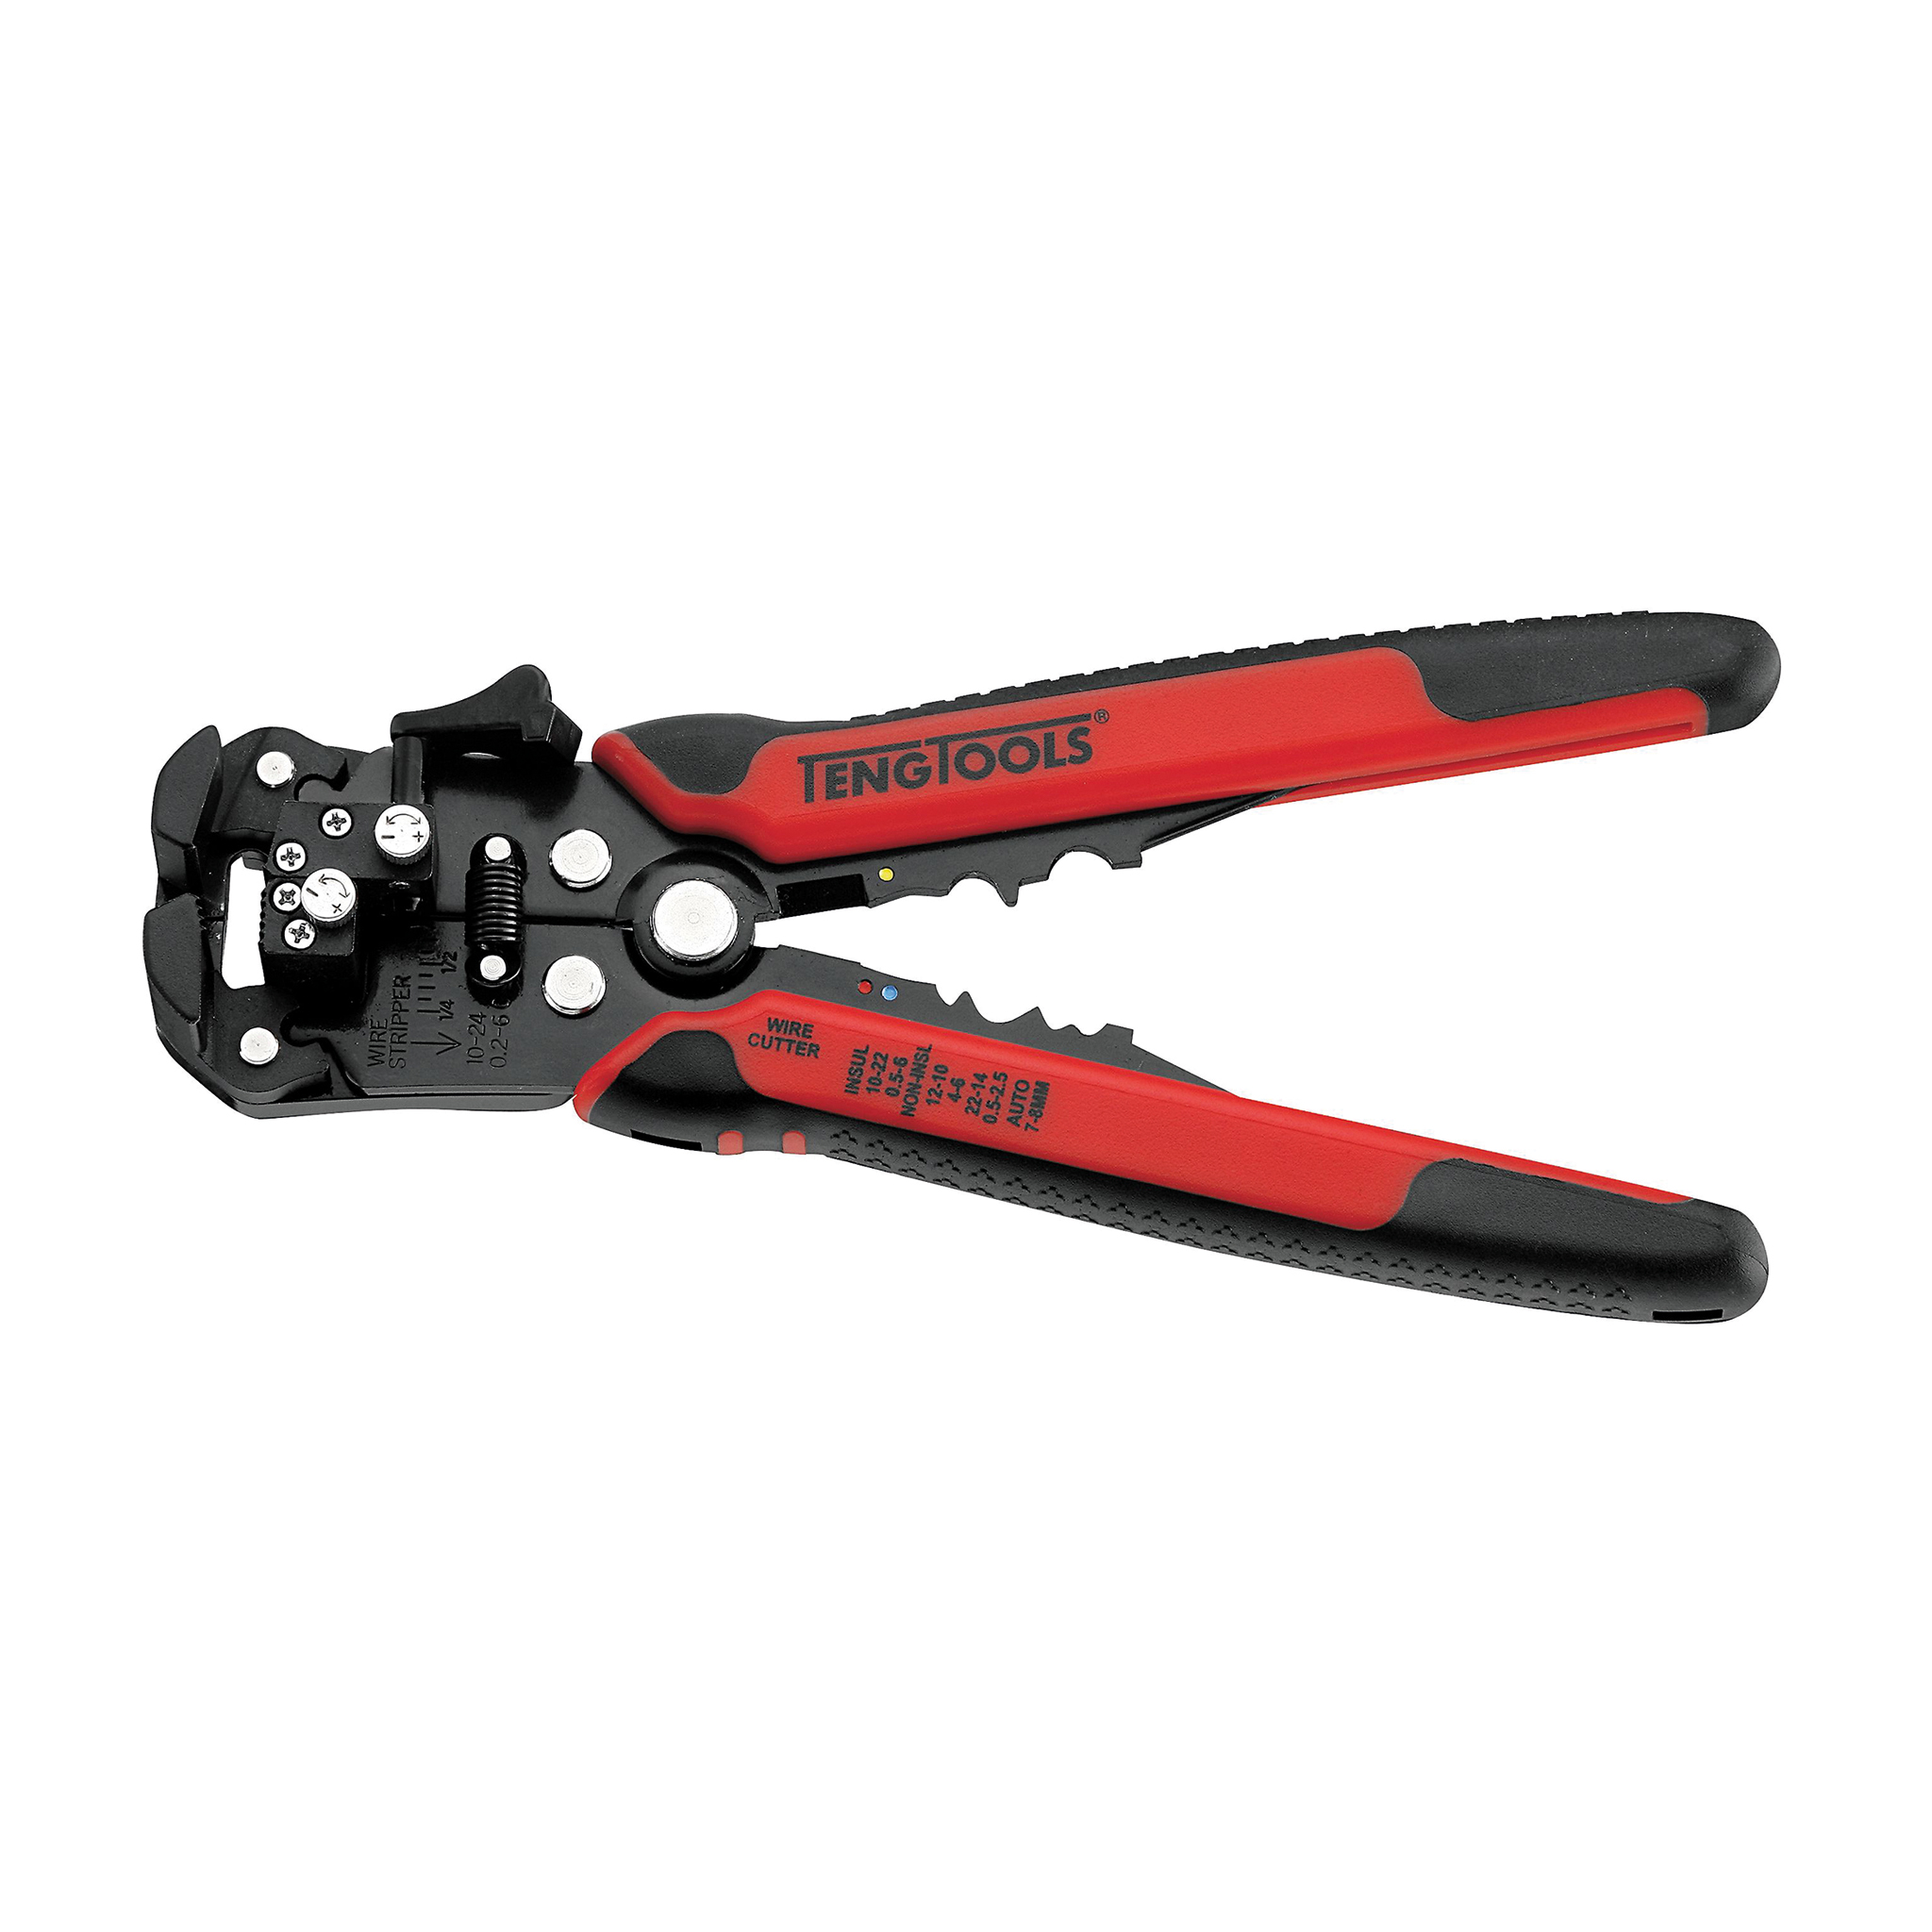 Teng Tools Automatic strippers, wire cutters and crimping pliers for cables, 0.13mm and 8.0mm - CP60